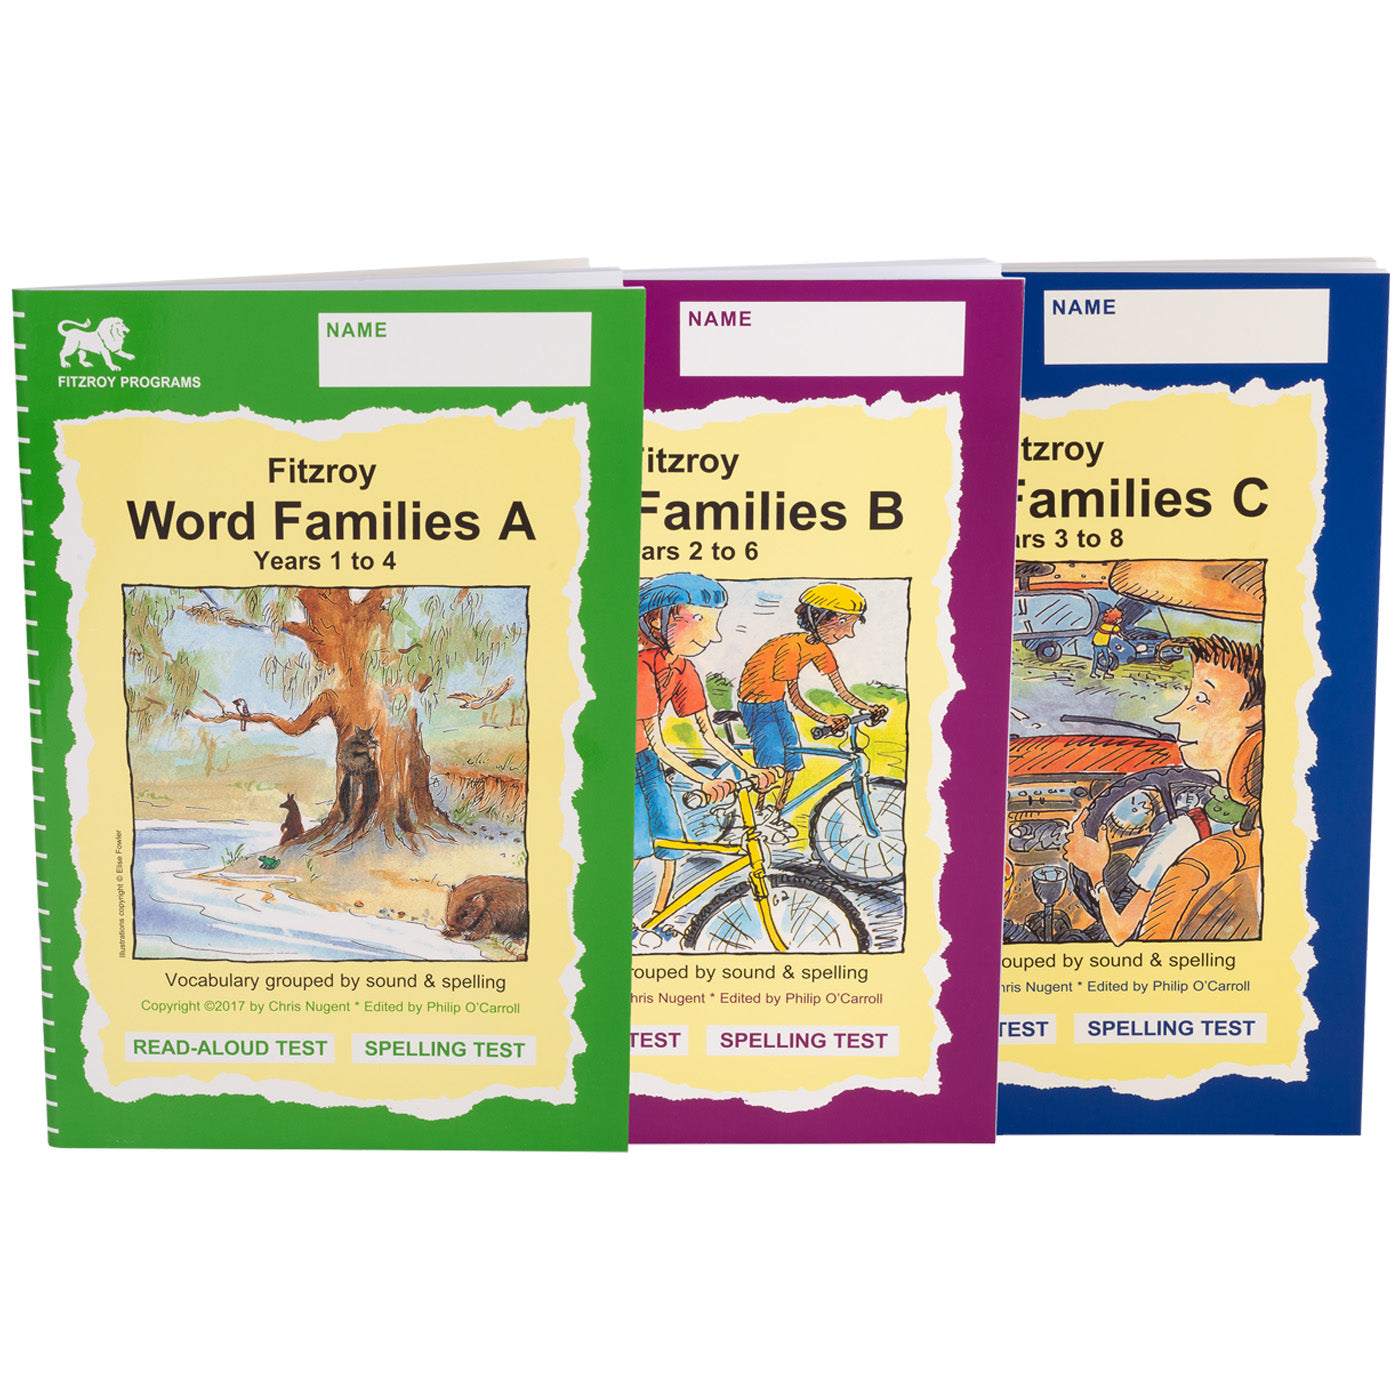 Fitzroy Word Families - set of 3